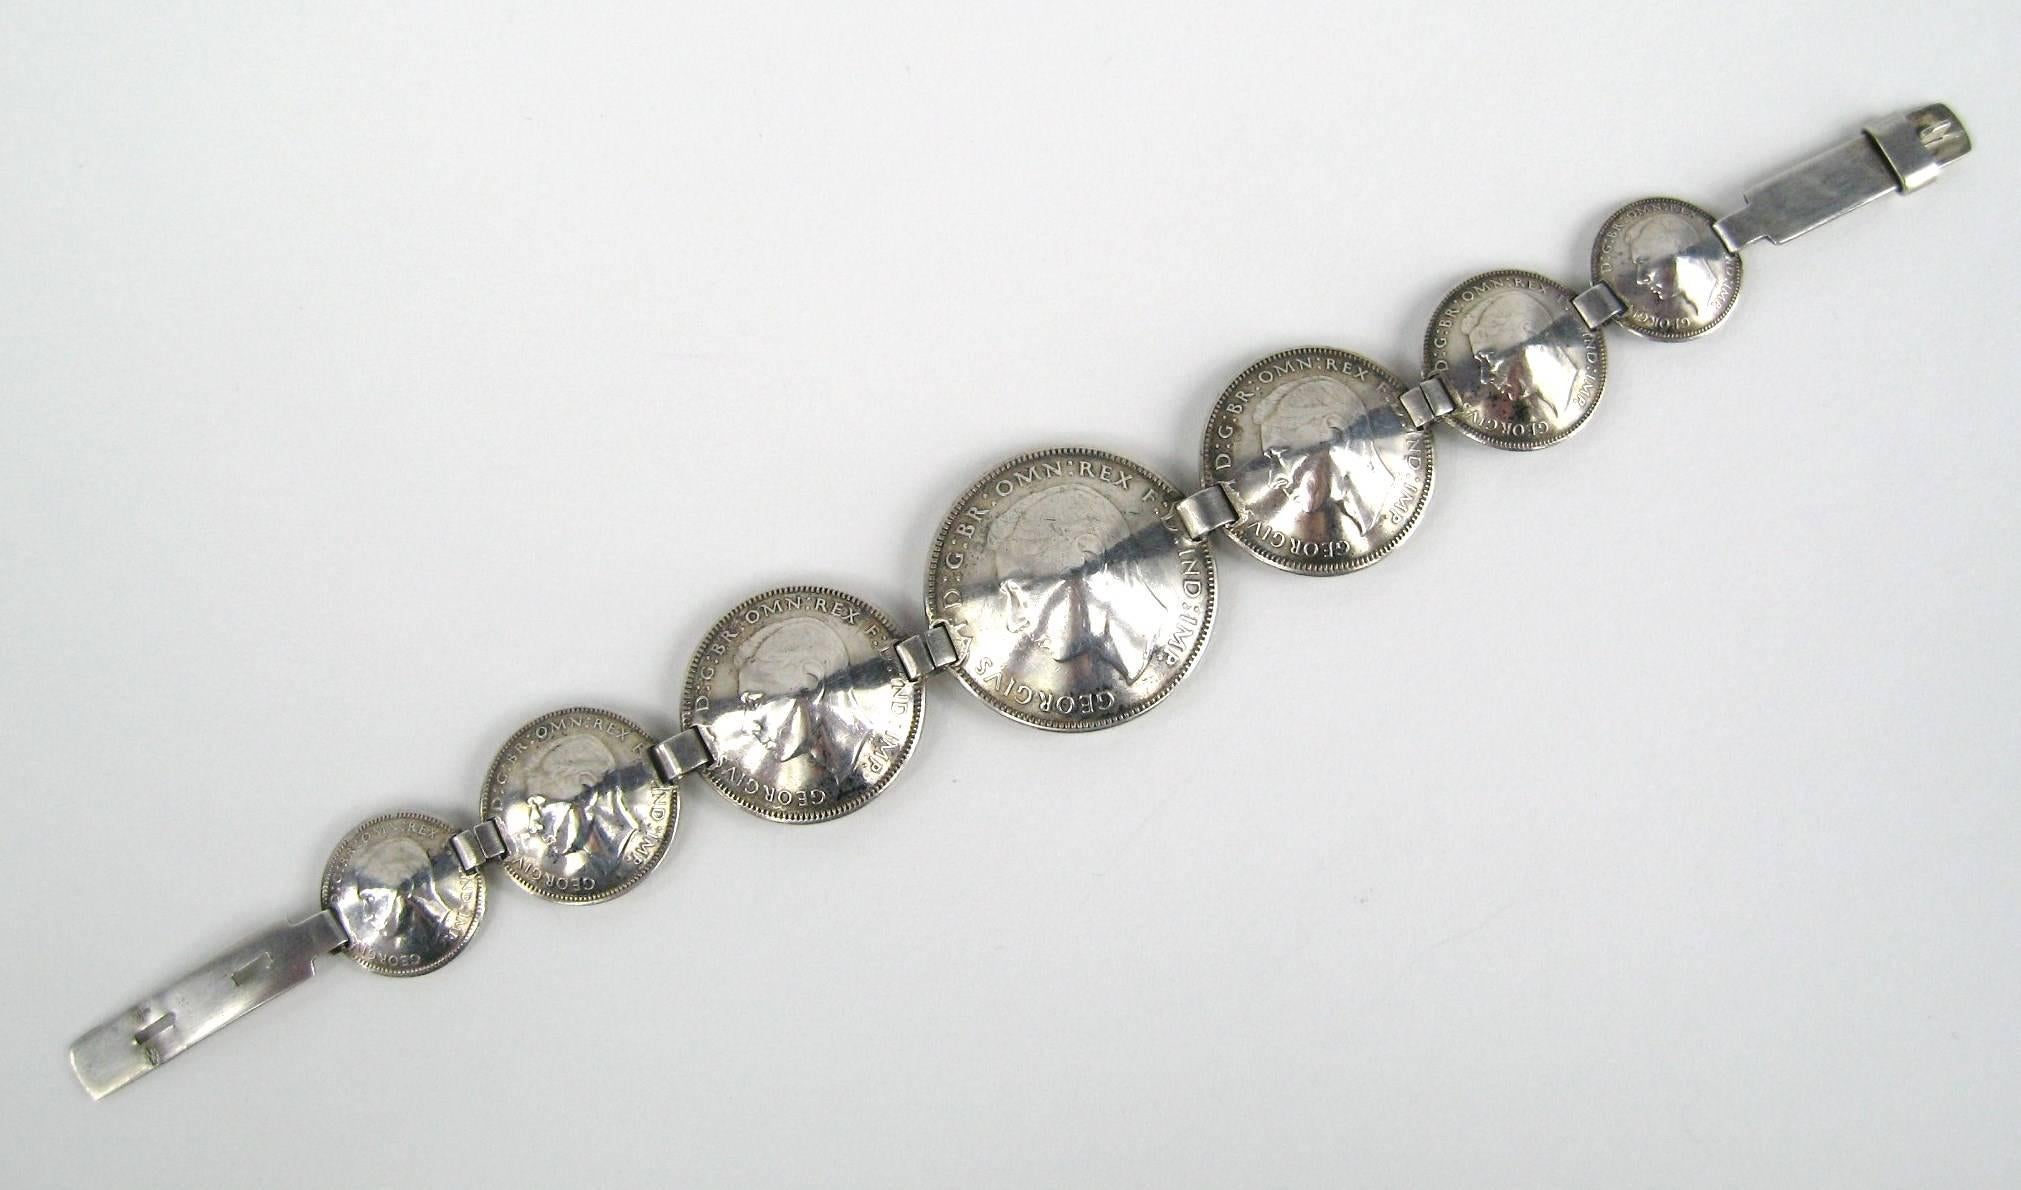 Australian Sterling silver coin bracelet. Measuring 8.25 inches. The coins measuring 1.09 inches down to .59. It has a Hand wrought closure. This will fit up to a 7